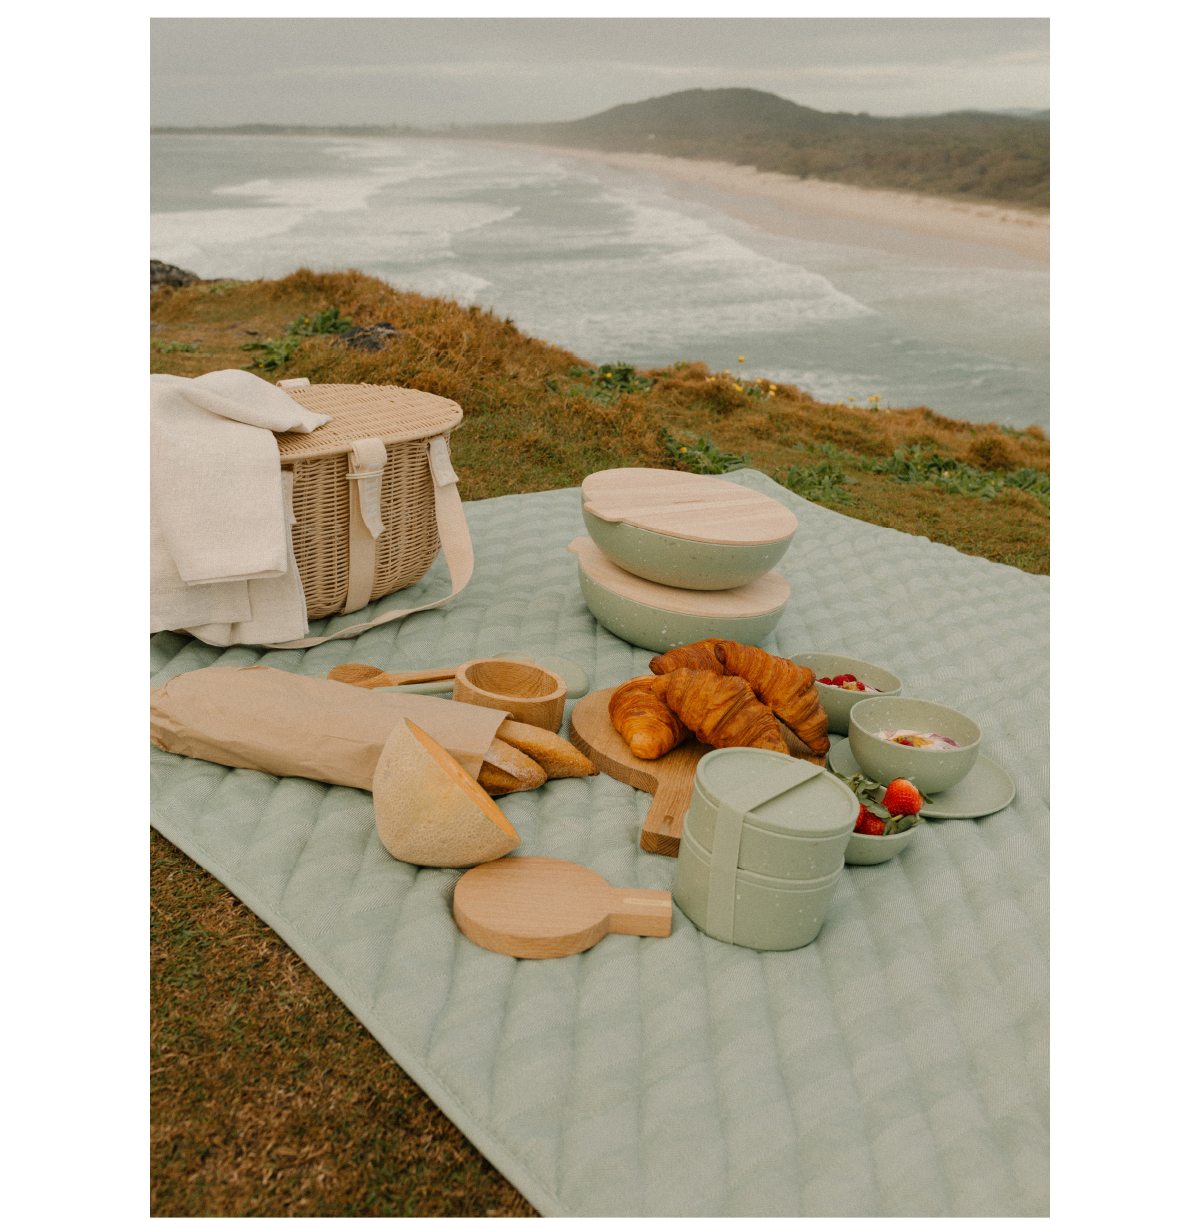 Picnicware | The warmer months call for dining outdoors in the sunshine. Shop our range of essential picnic baskets, picnic rugs, cooler bags and other outdoor essentials.